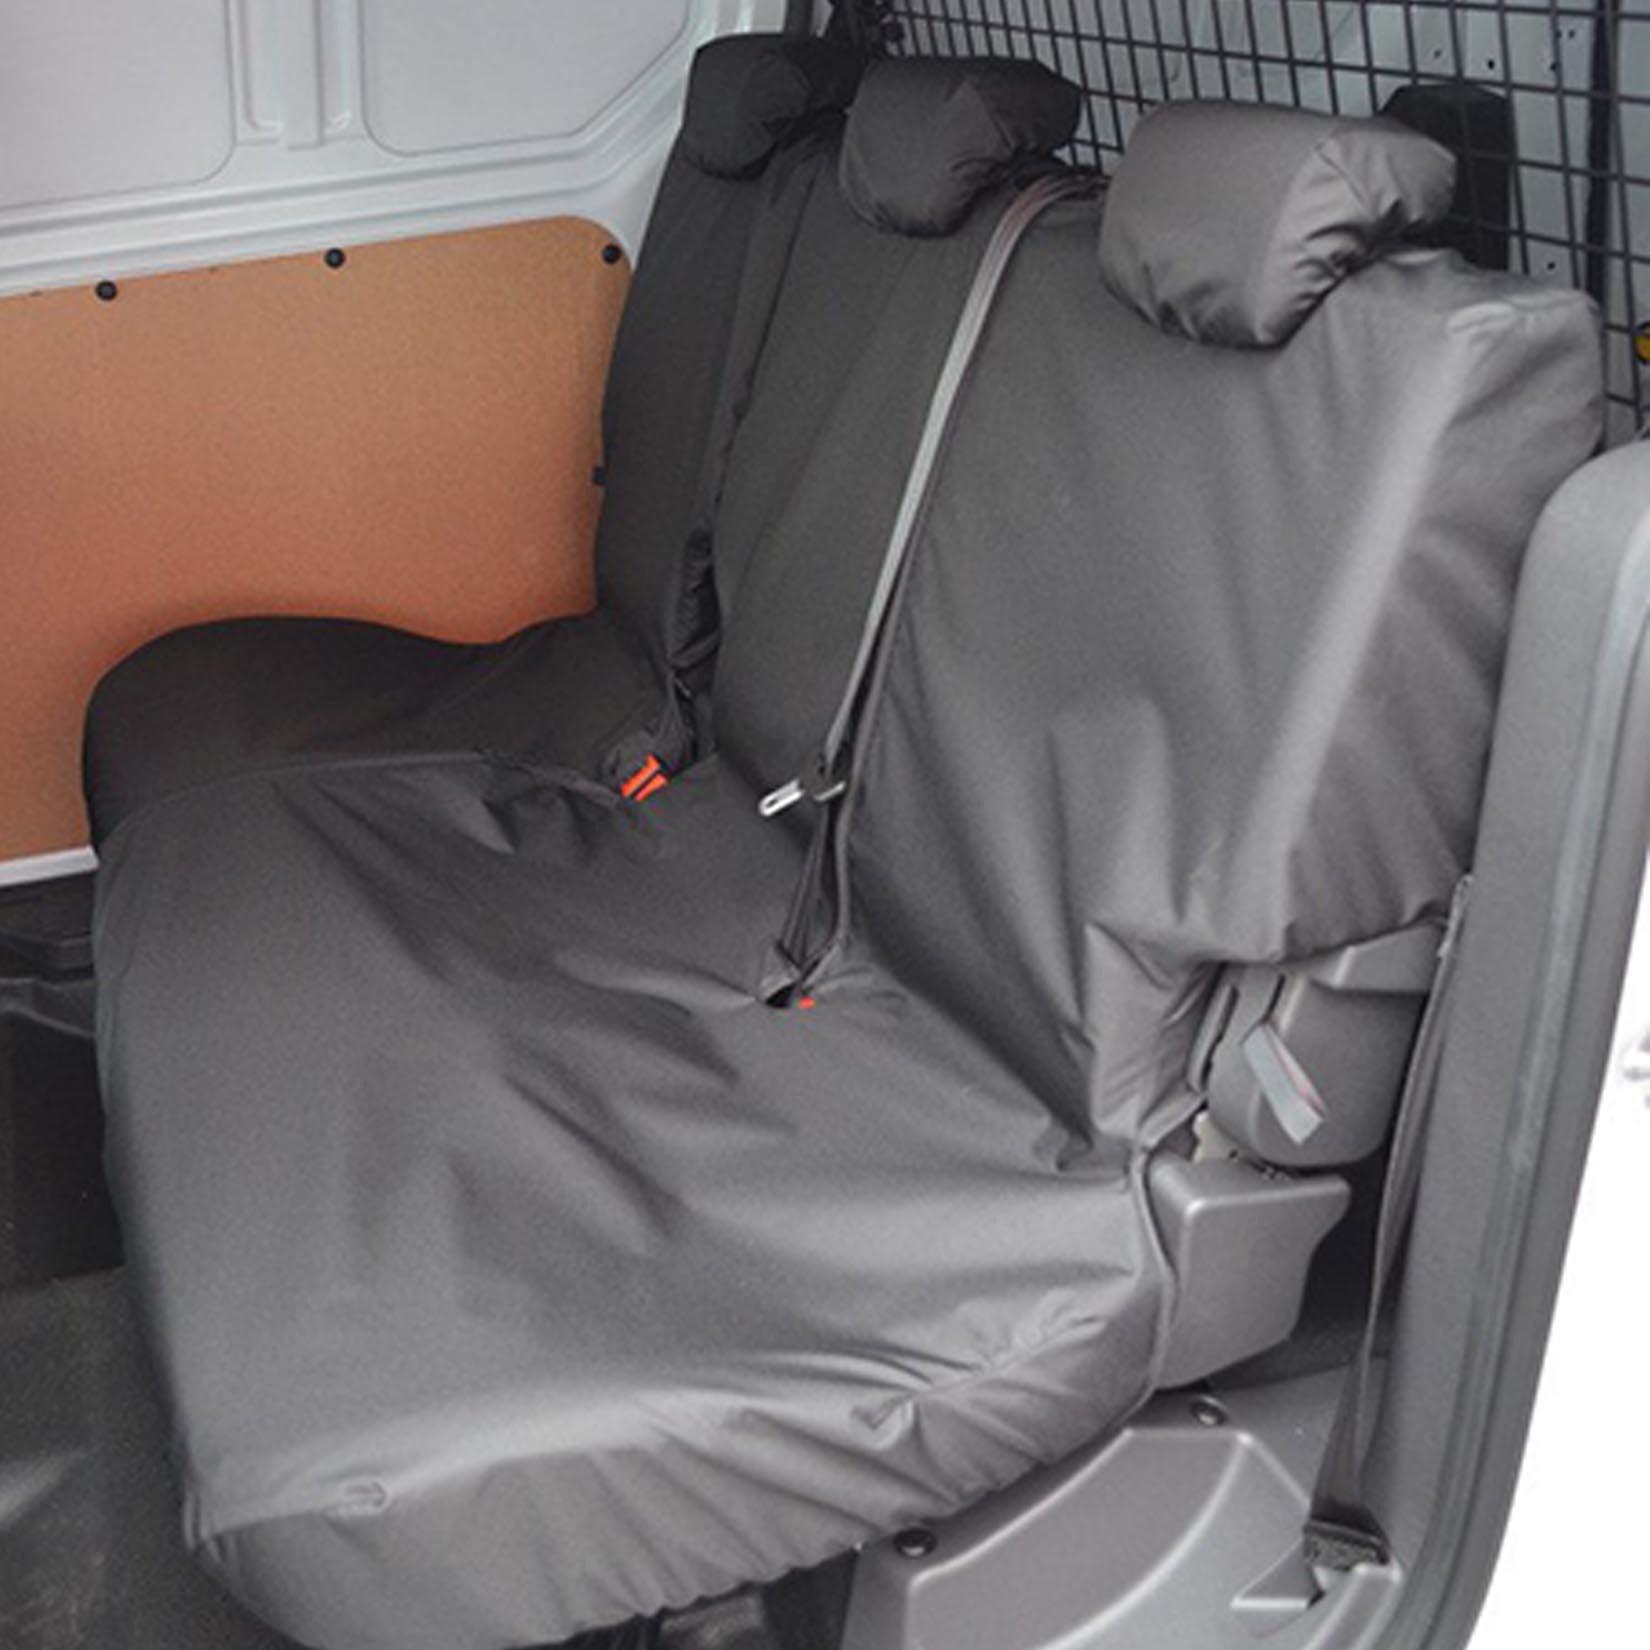 FORD TRANSIT CONNECT VAN 2018 ON DOUBLE CAB IN VAN REAR SEAT COVERS – BLACK - Storm Xccessories2